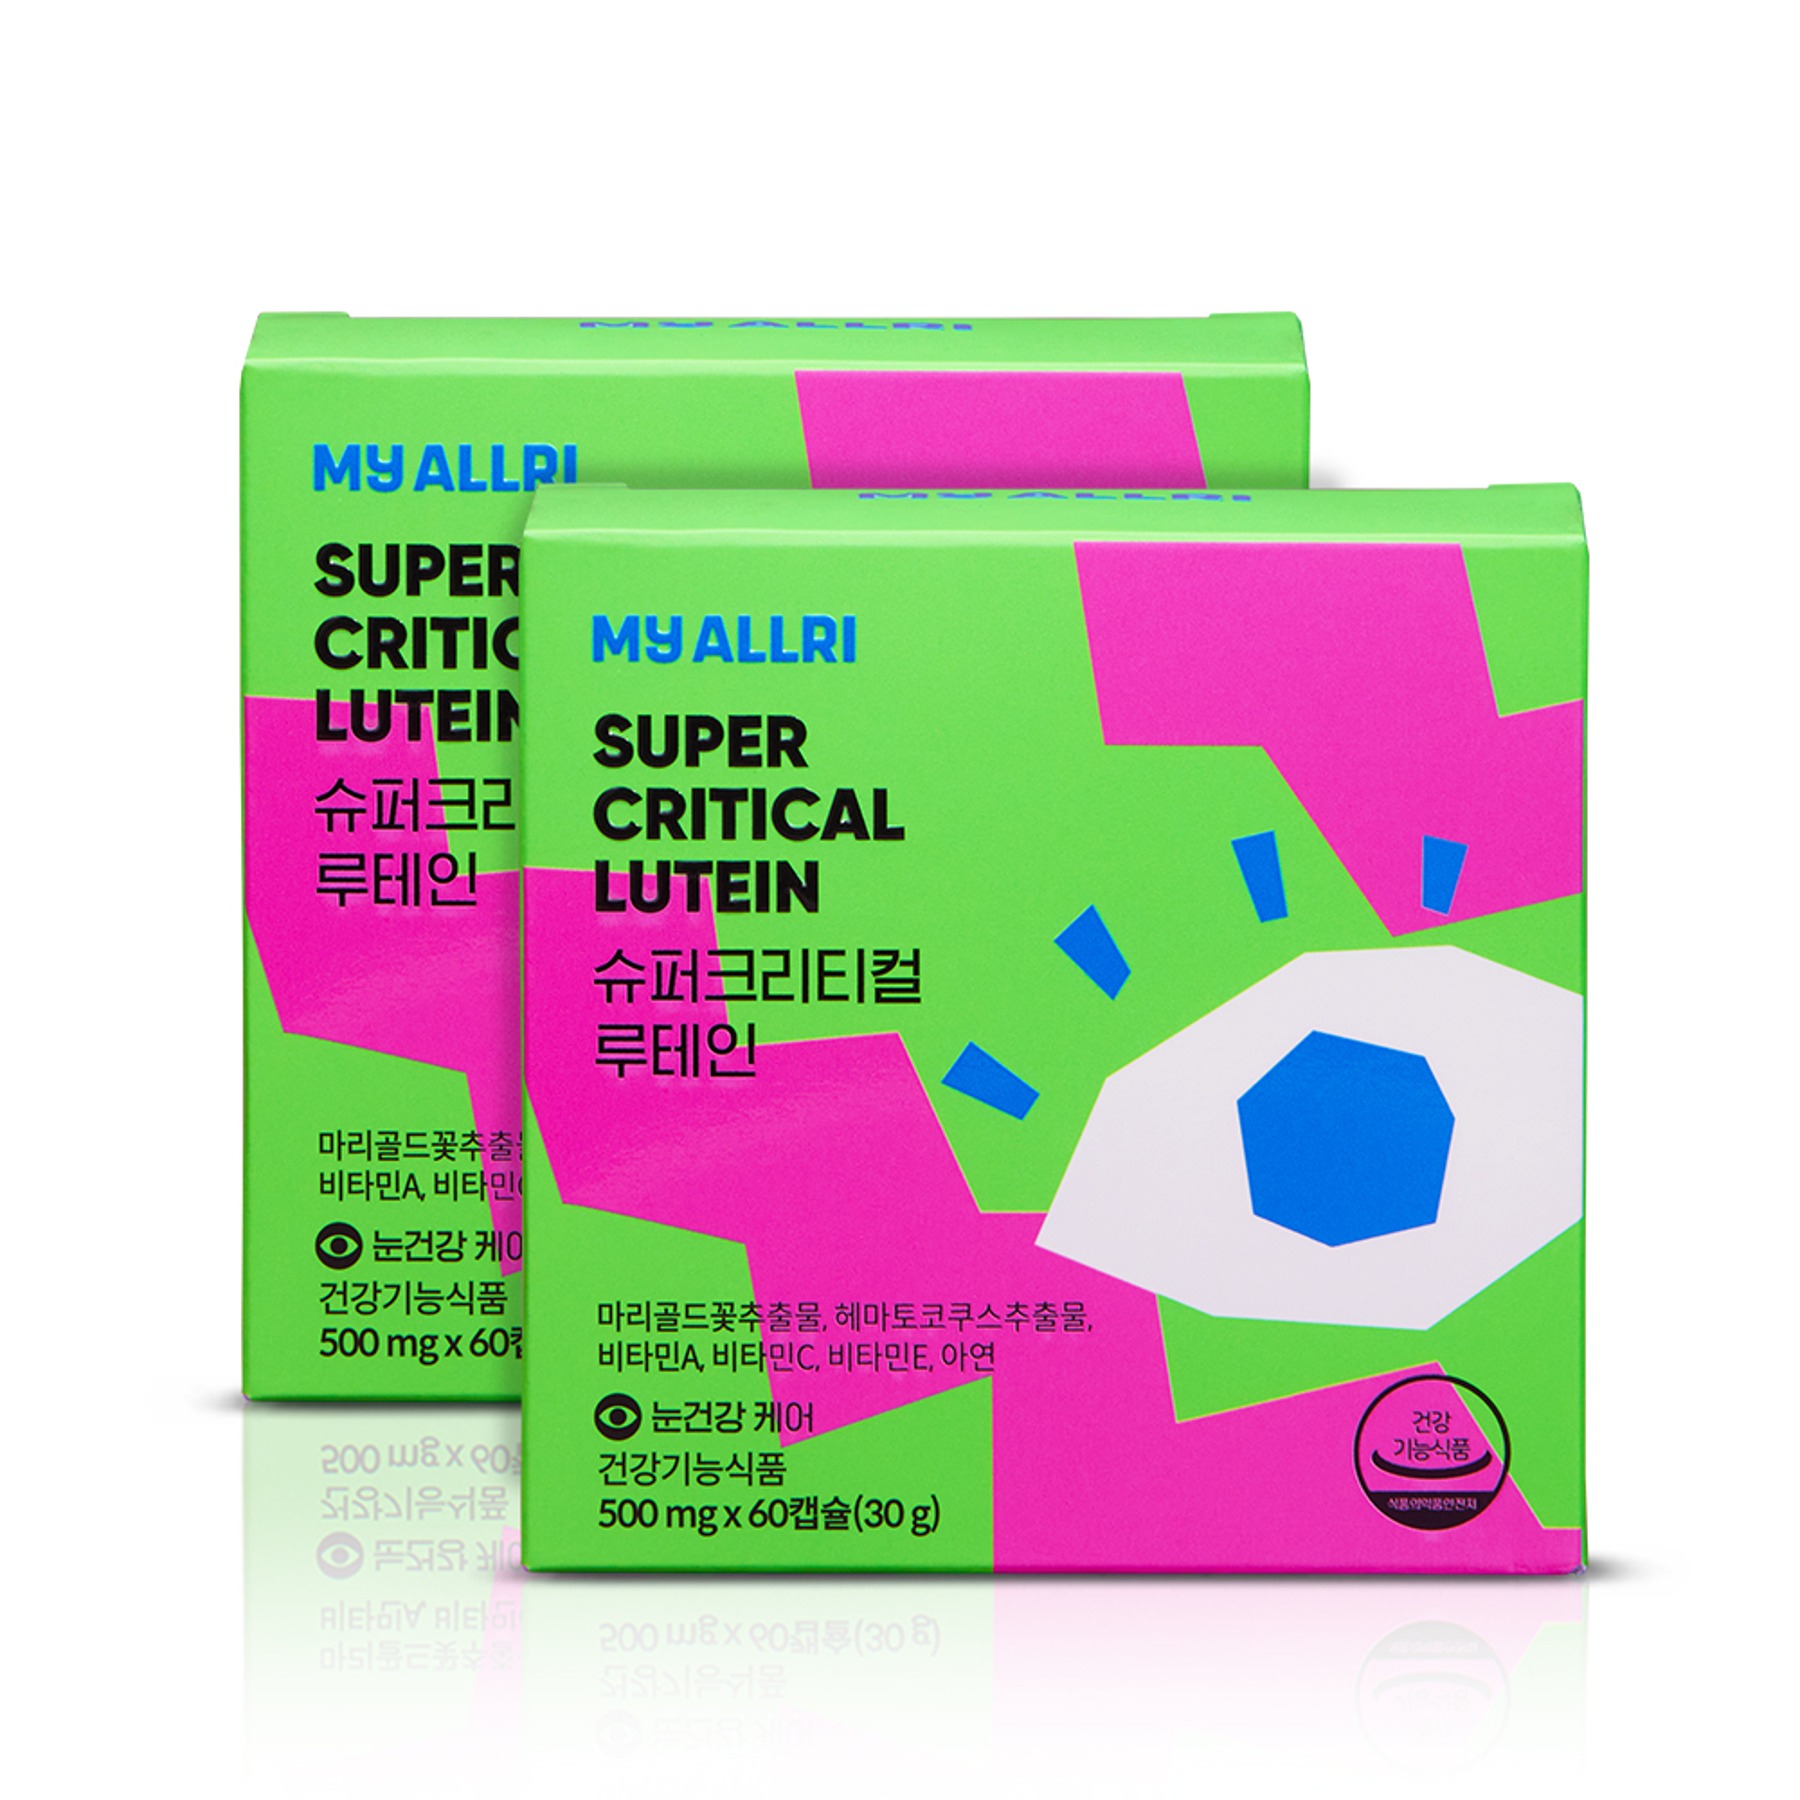 [10%] 2 supercritical lutein (4 months&#039; worth)